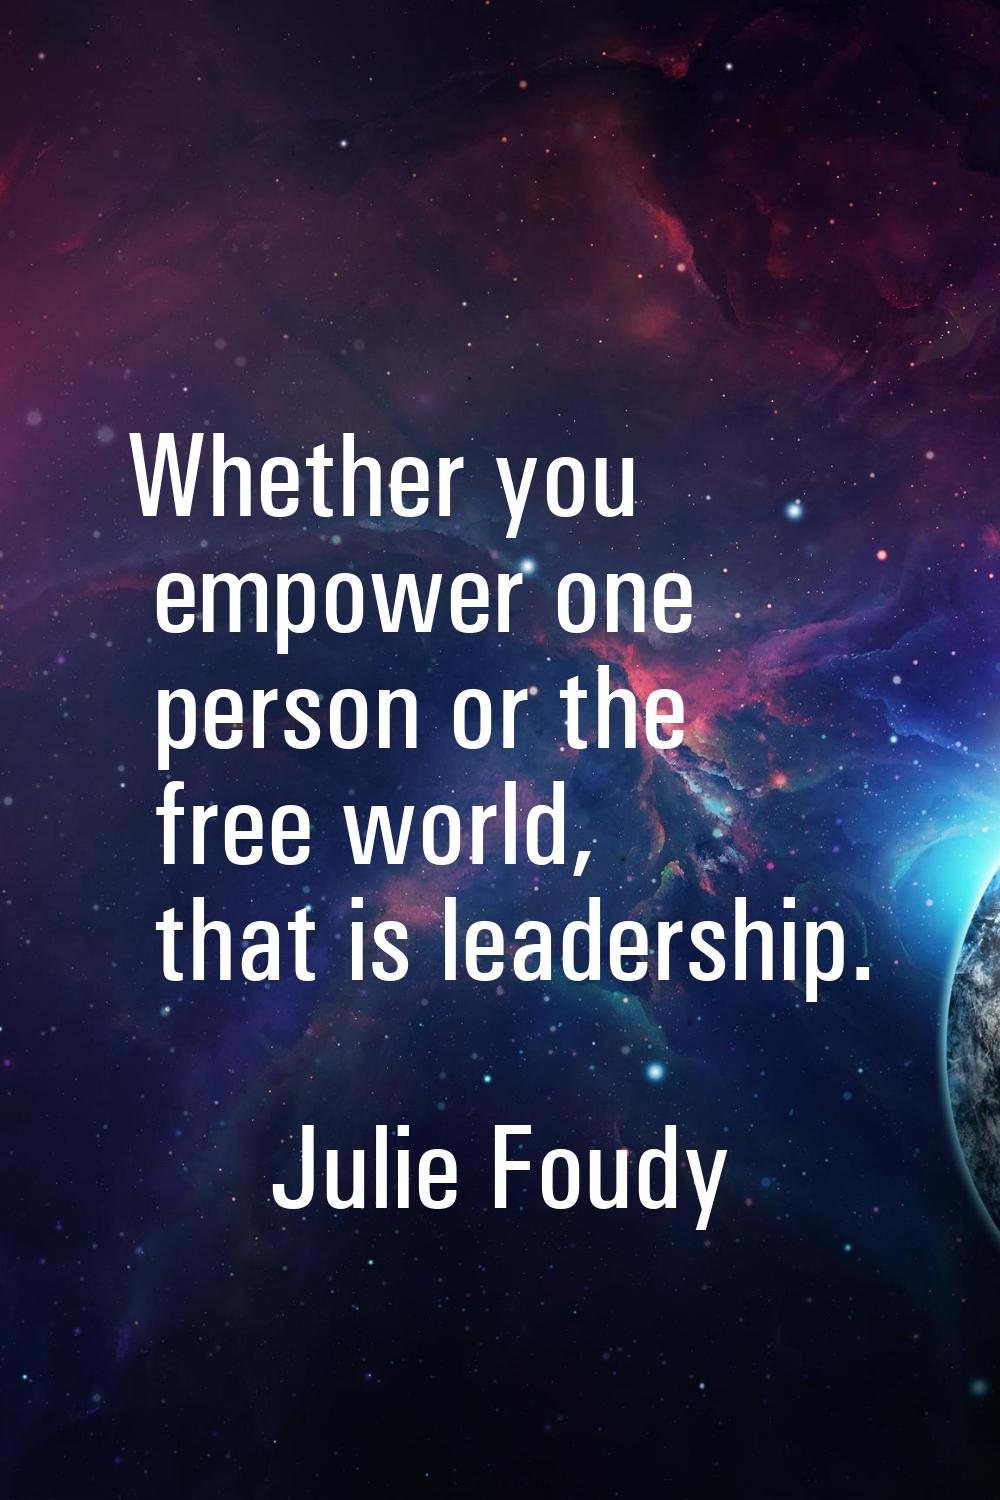 Whether you empower one person or the free world, that is leadership.